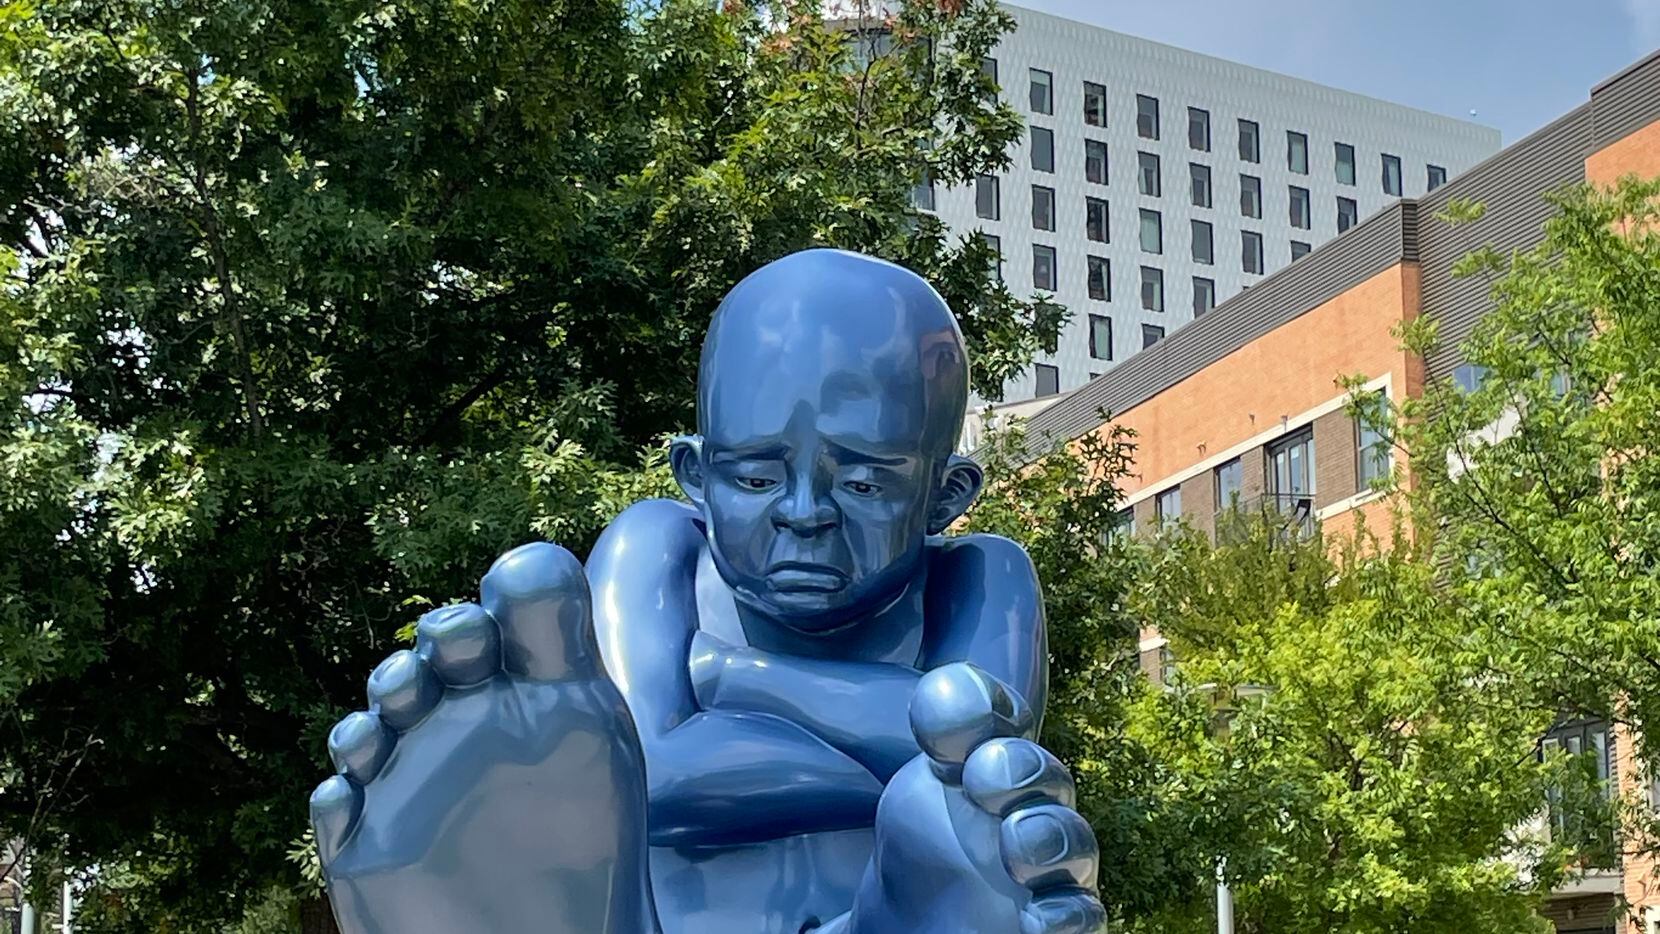 Babyfoot is a 13-foot-long and 8-foot-tall baby blue sculpture by Idan Zareski located in...